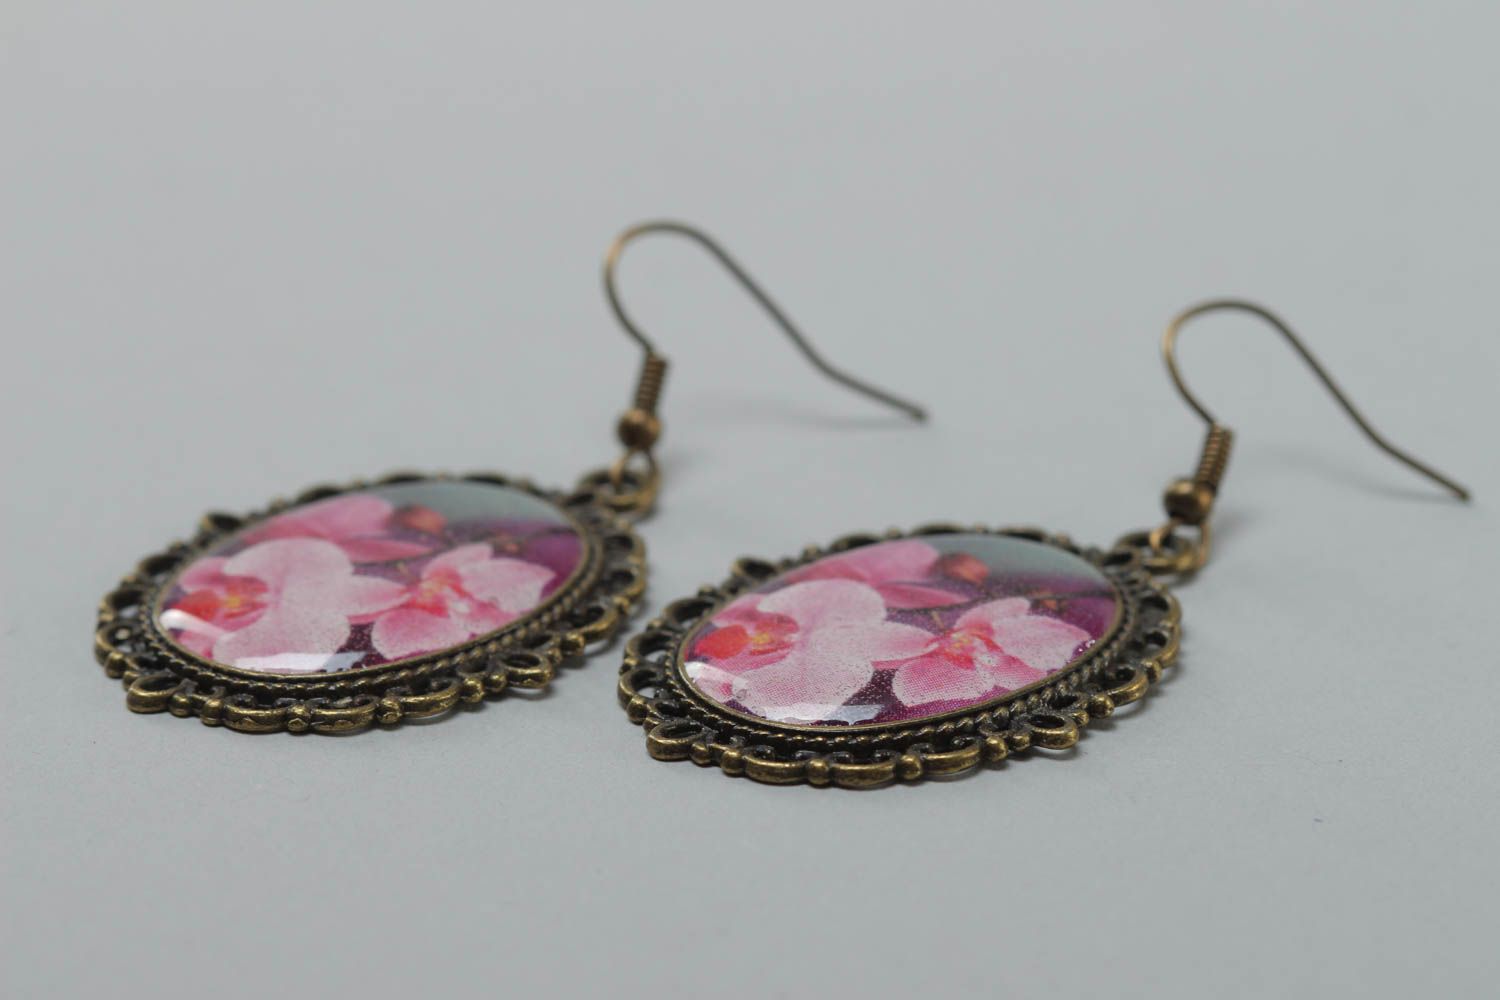 A set of handmade vintage earrings made of glass glaze with metal fittings and flower print photo 3